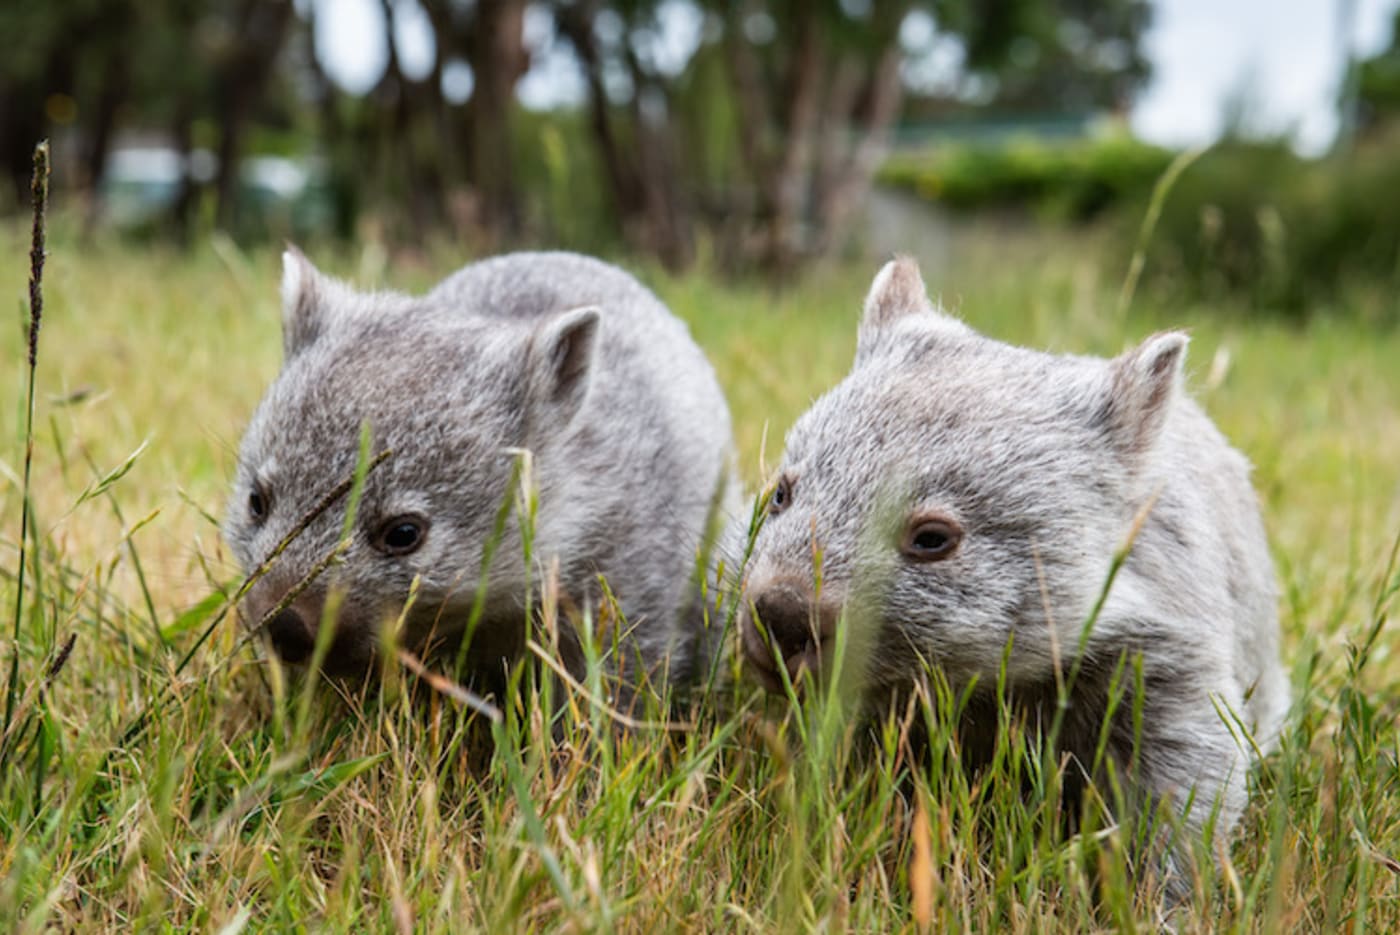 The Bass Strait Island Wombat is one of the culturally significant species soon to return to lungtalanana